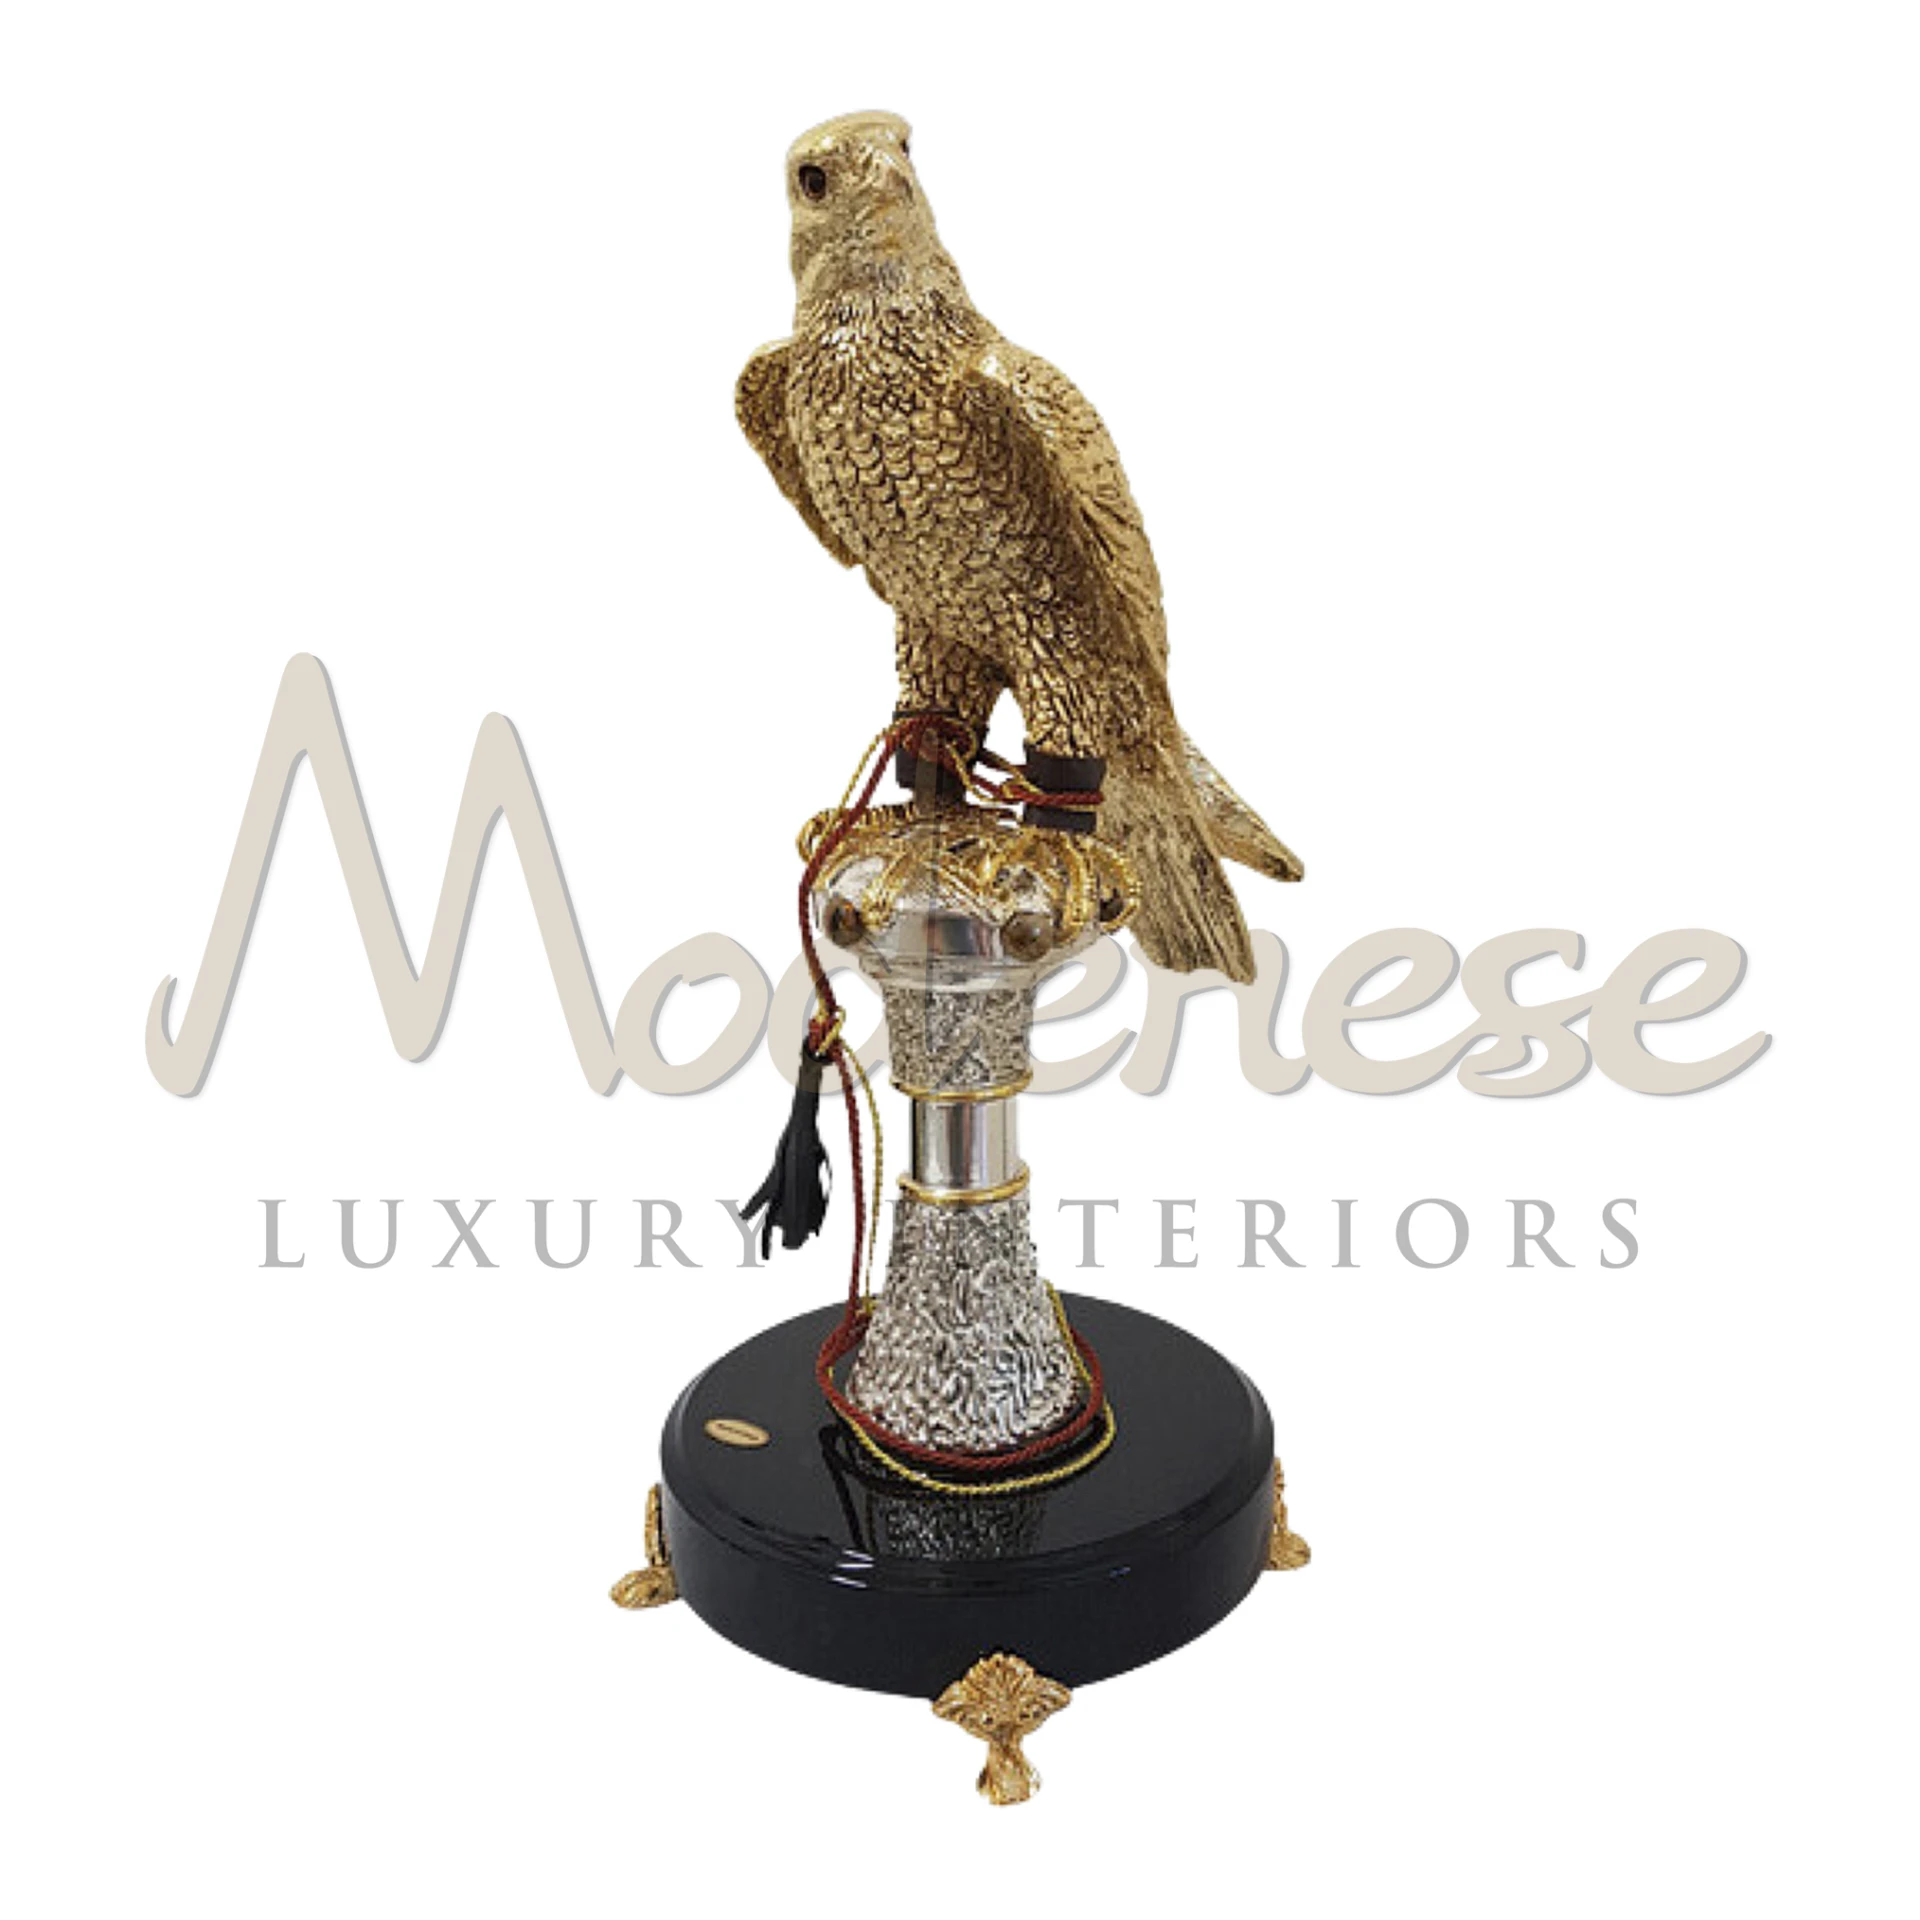 Luxury Designer Falcon statuette, crafted with precious materials and detailed artistry, for an opulent touch in luxury interior design and décor.